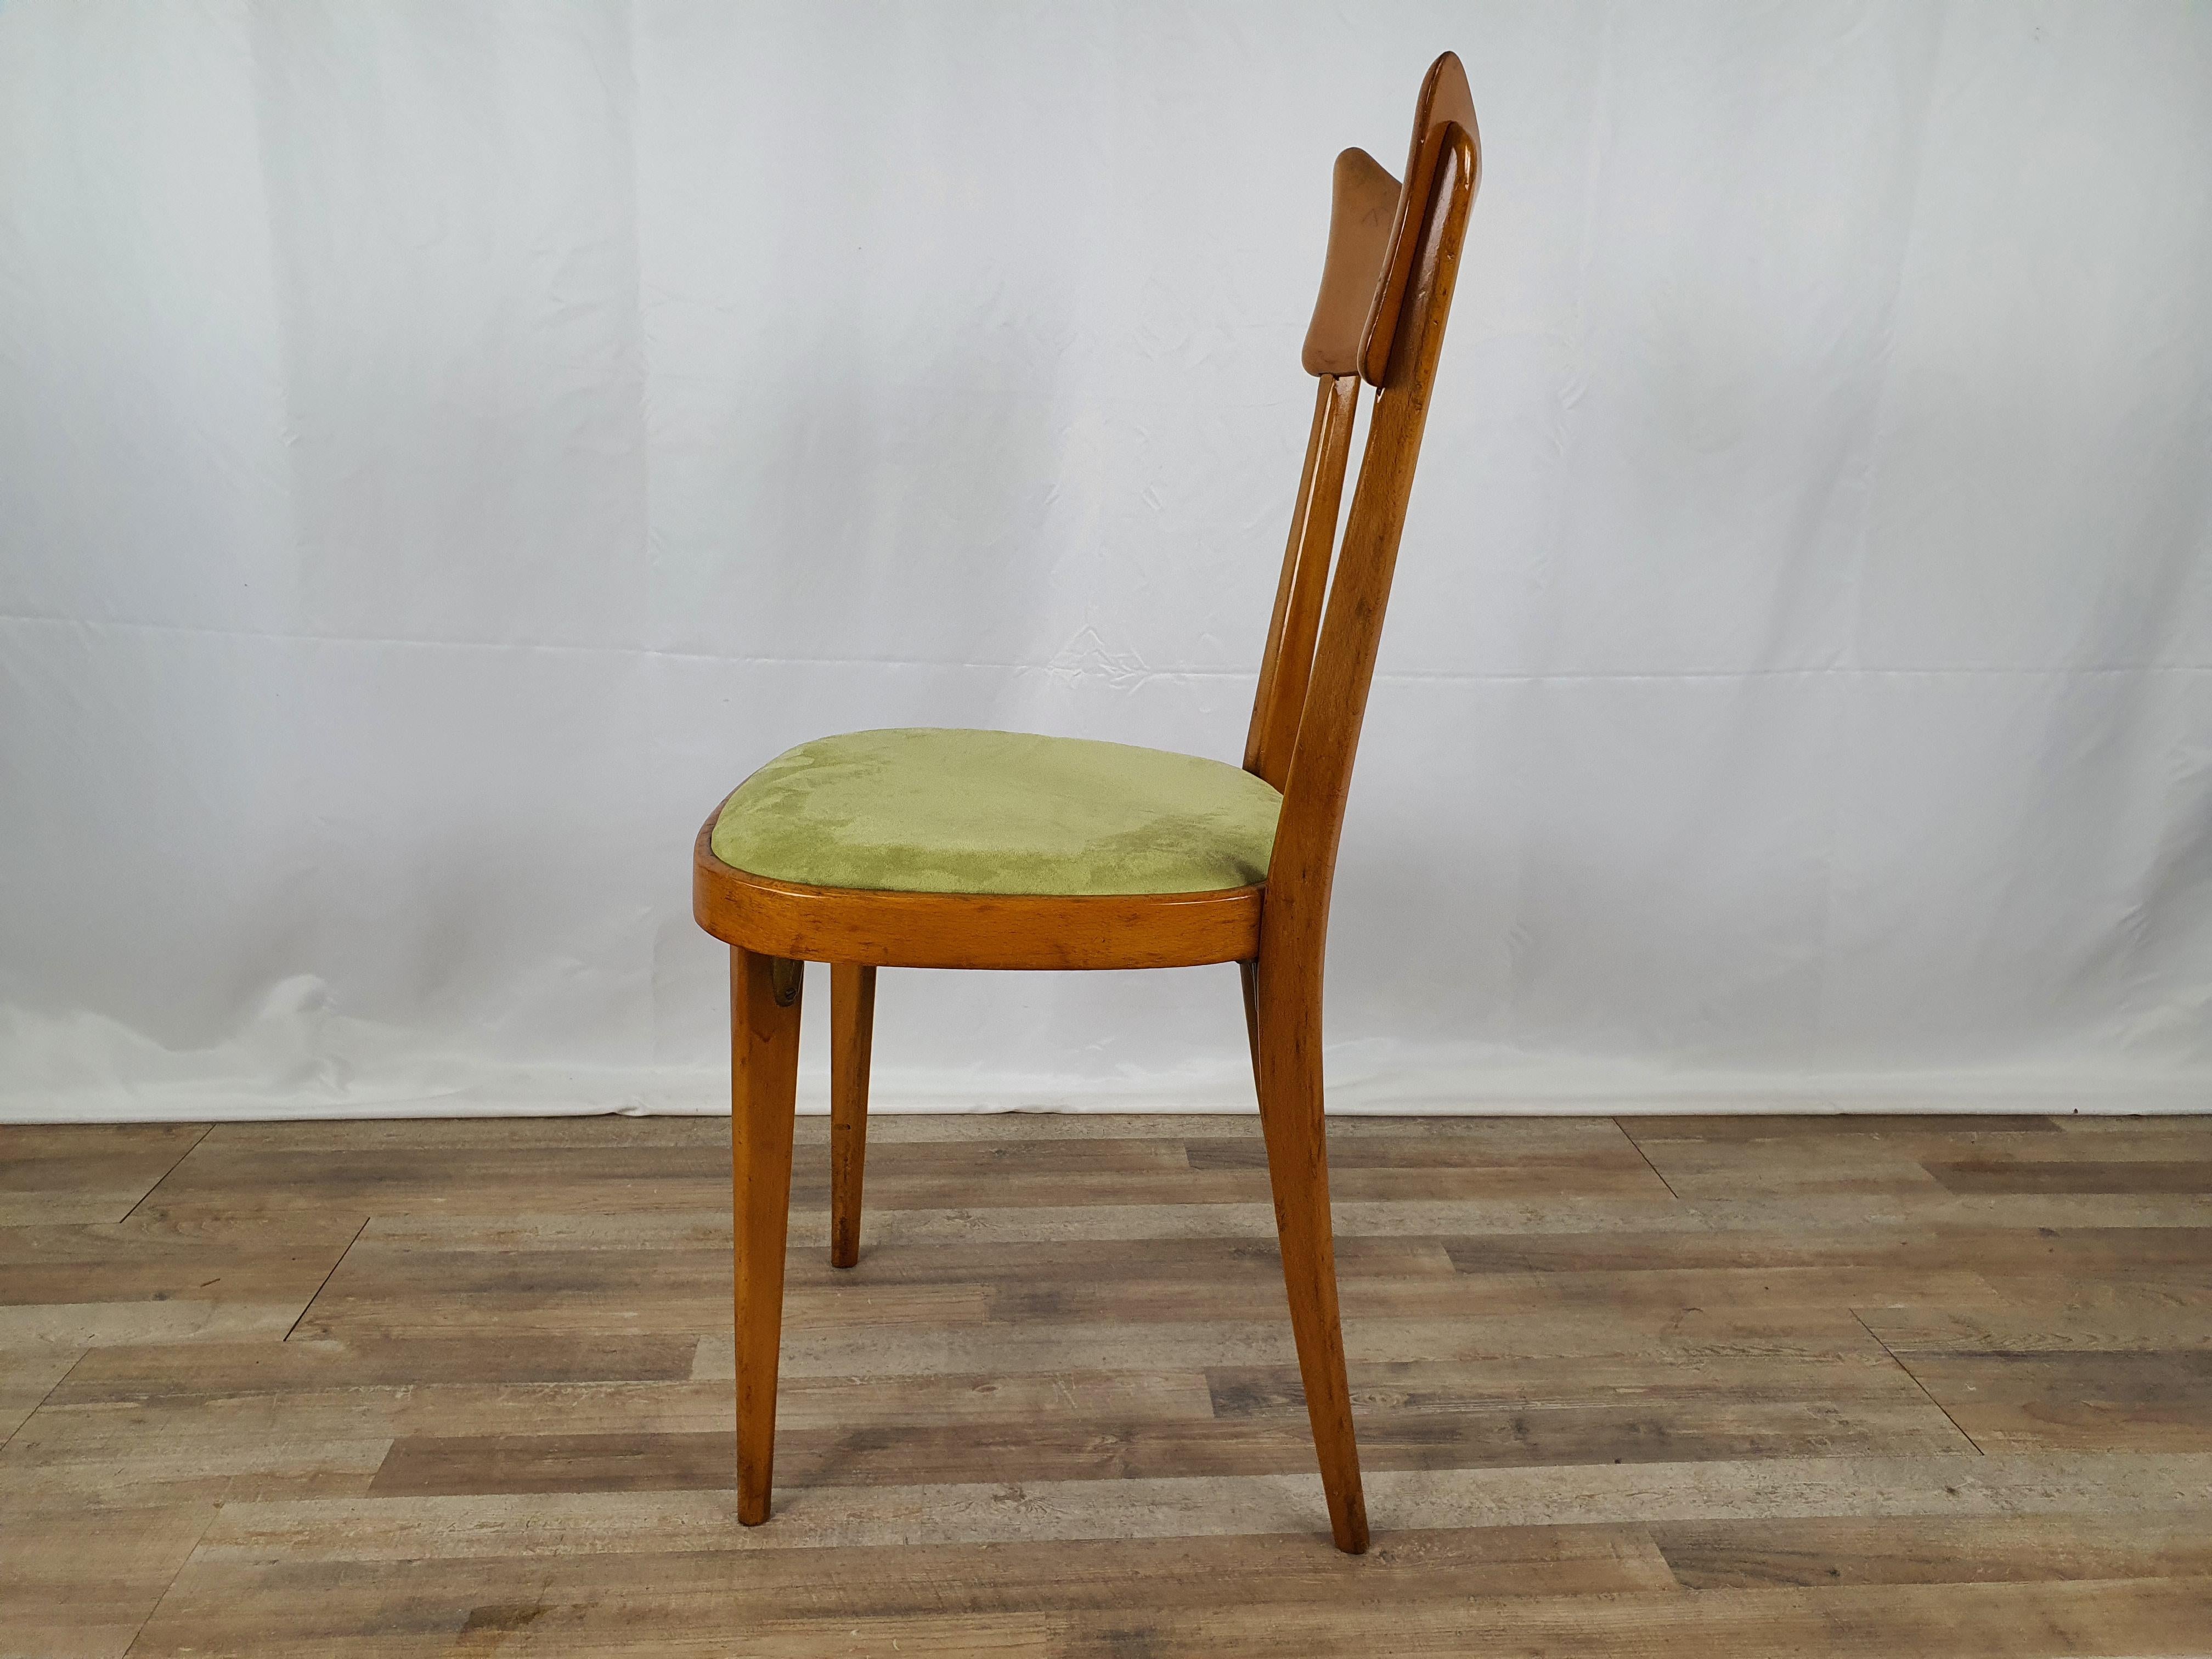 Italian Padded Beech Chair from the 1950s